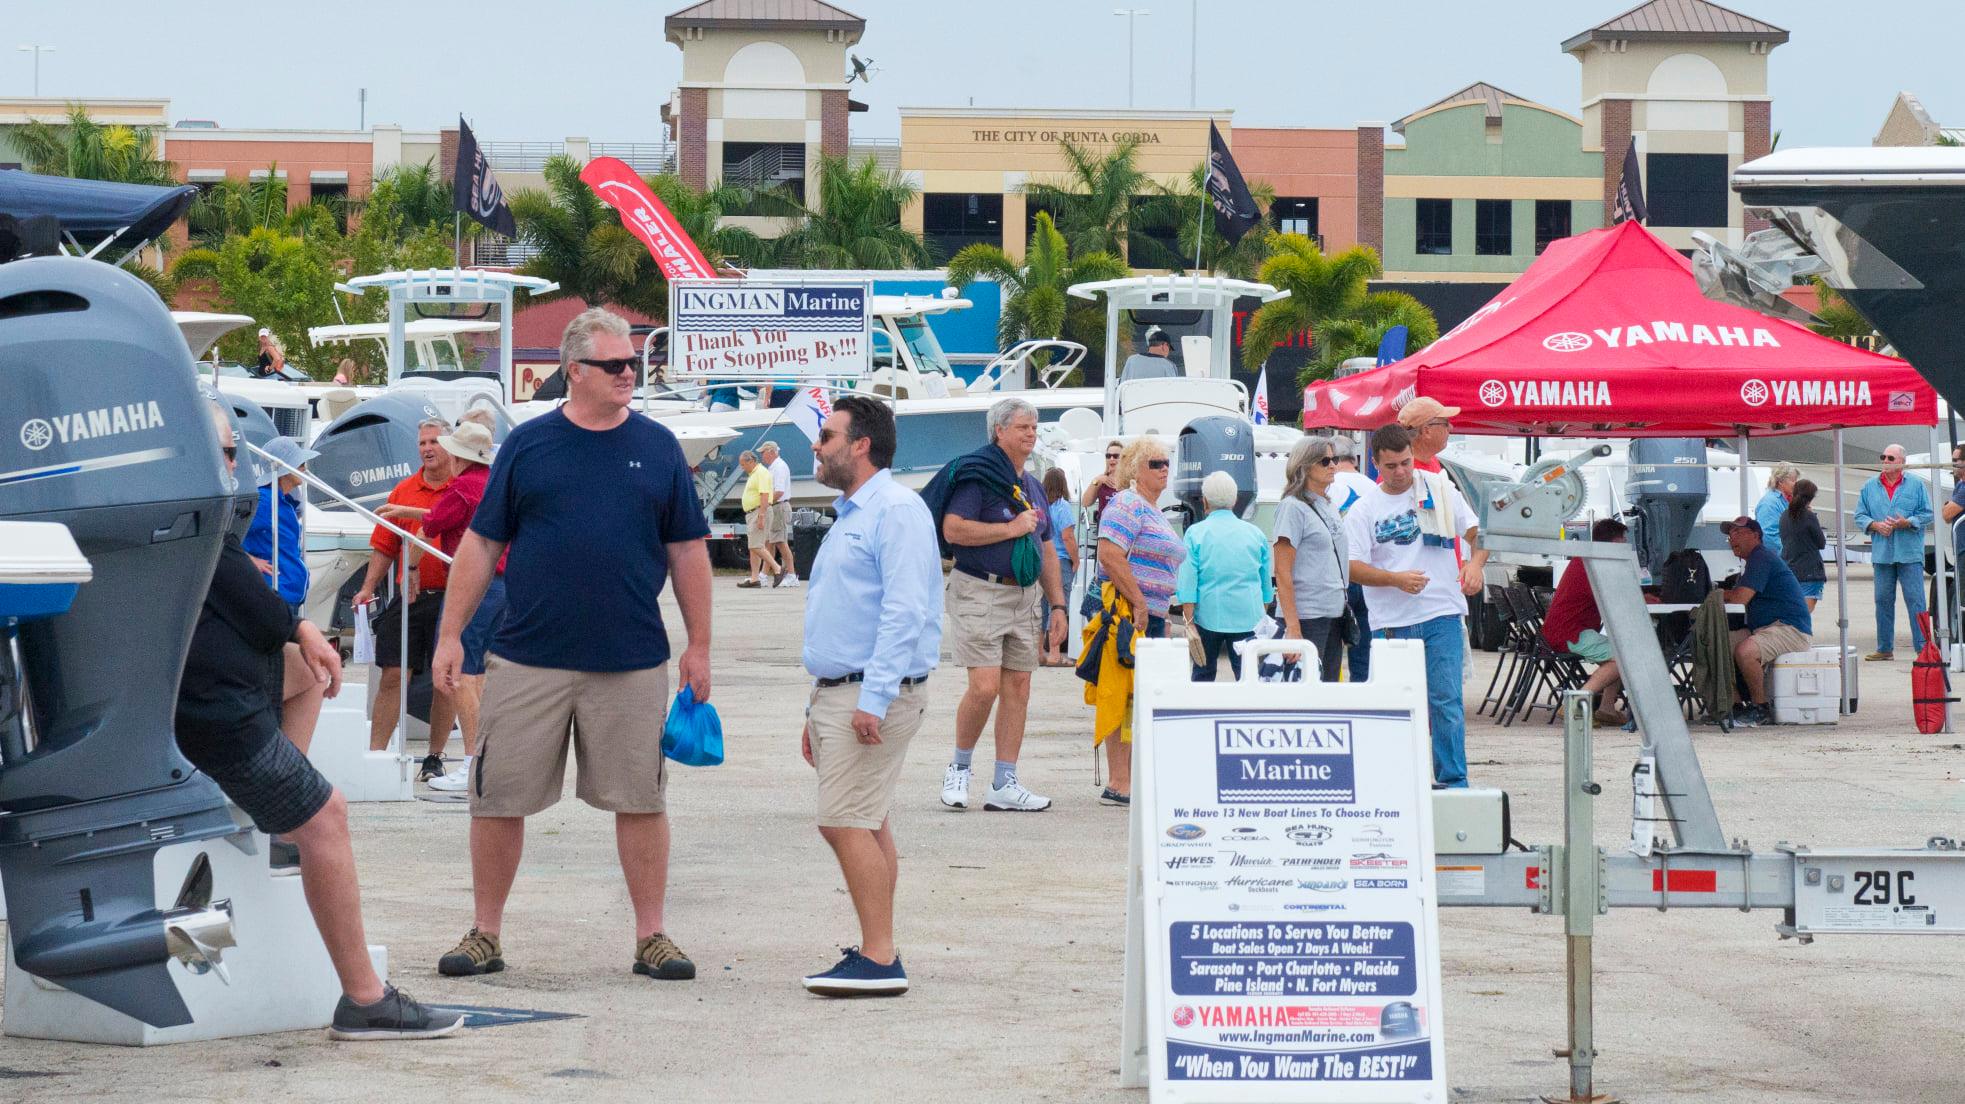 2022 Punta Gorda Boat Show canceled due to the sale of the event space